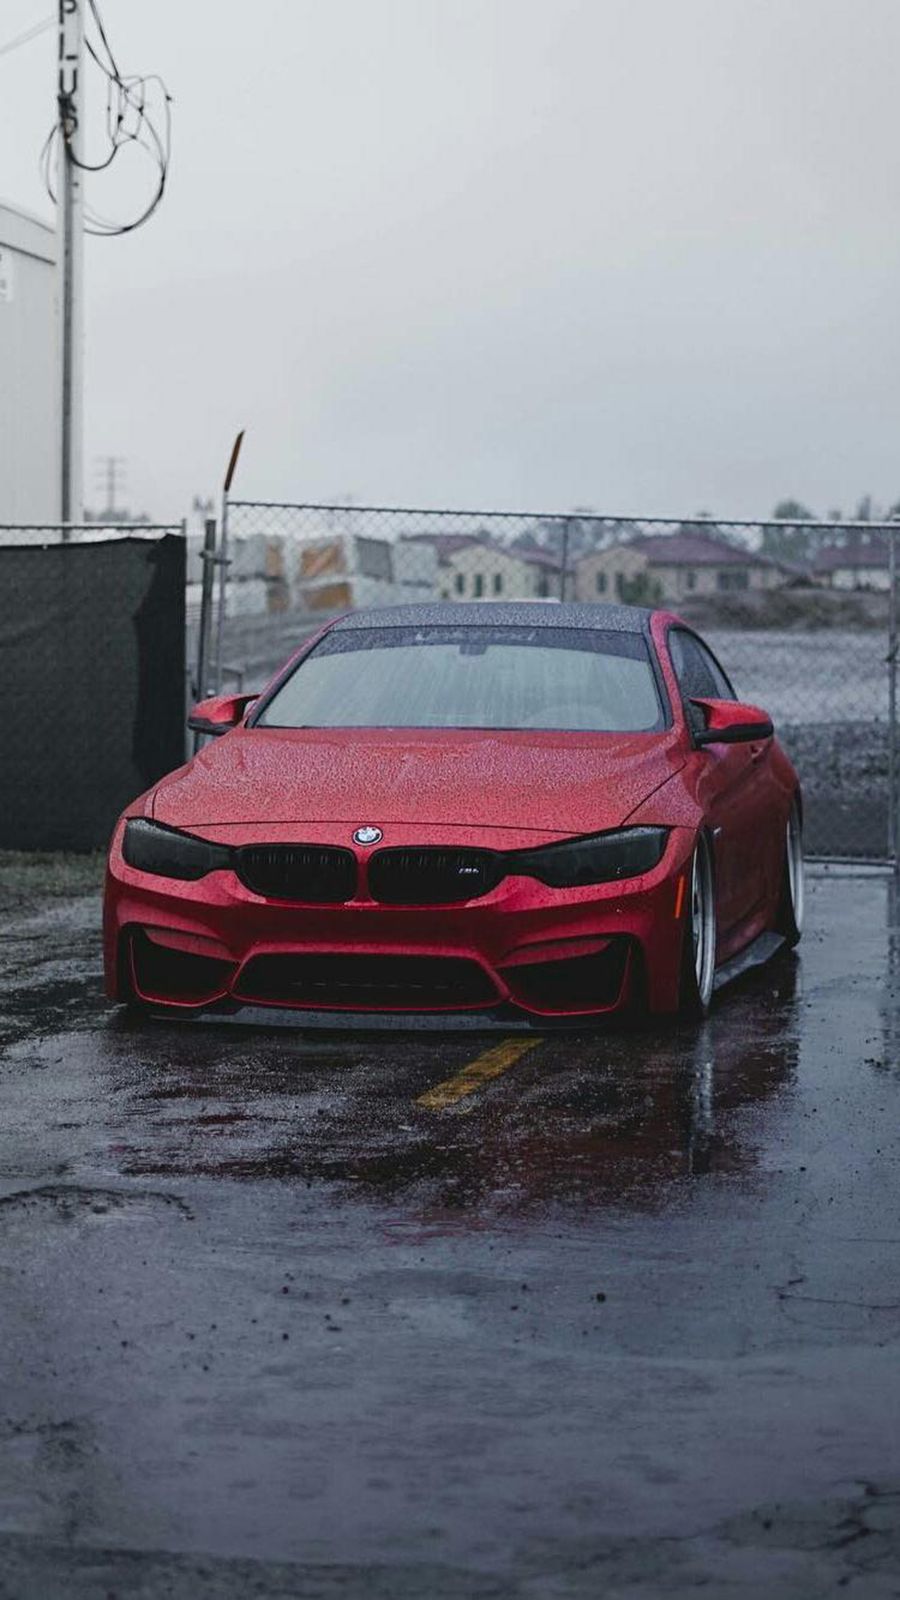 A red car parked in the rain - BMW